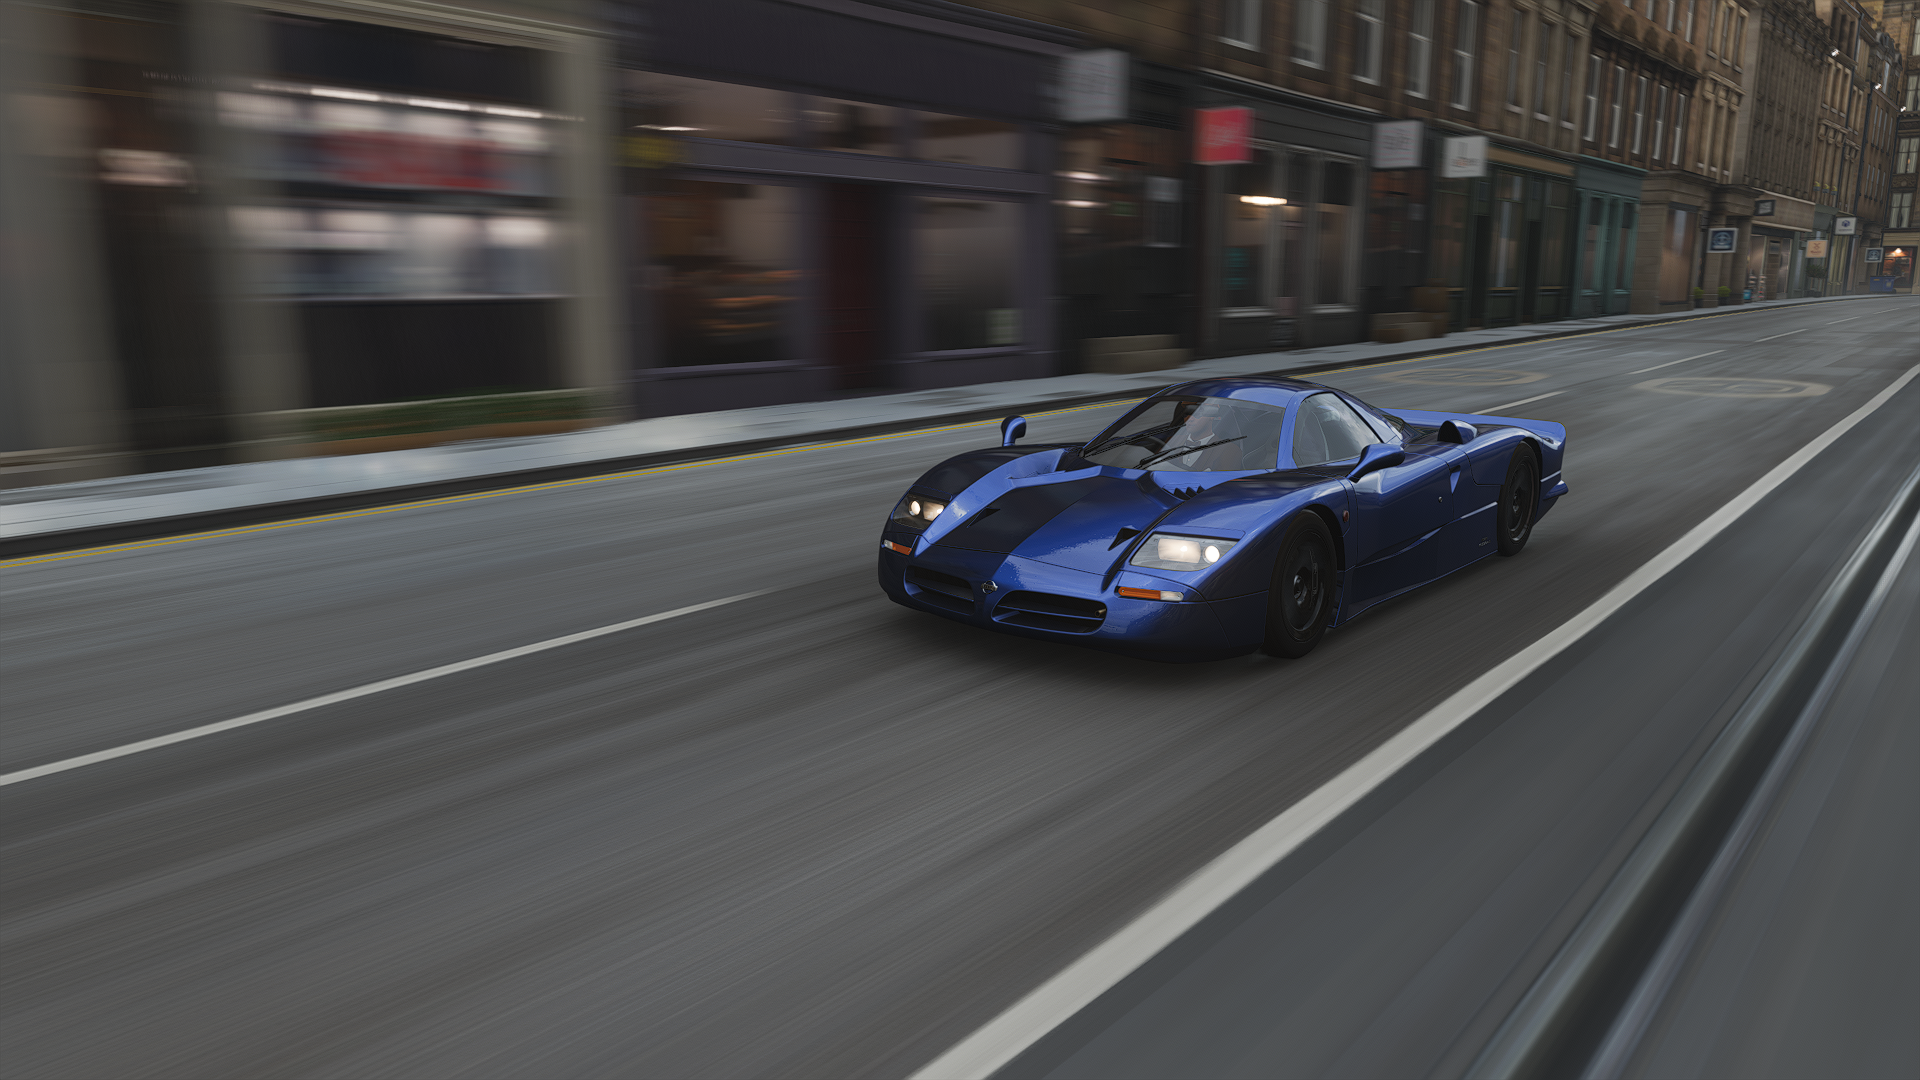 General 1920x1080 Forza Forza Horizon Forza Horizon 4 Nissan R390 GT1 racing car video games CGI road headlights blurred blurry background frontal view building driving